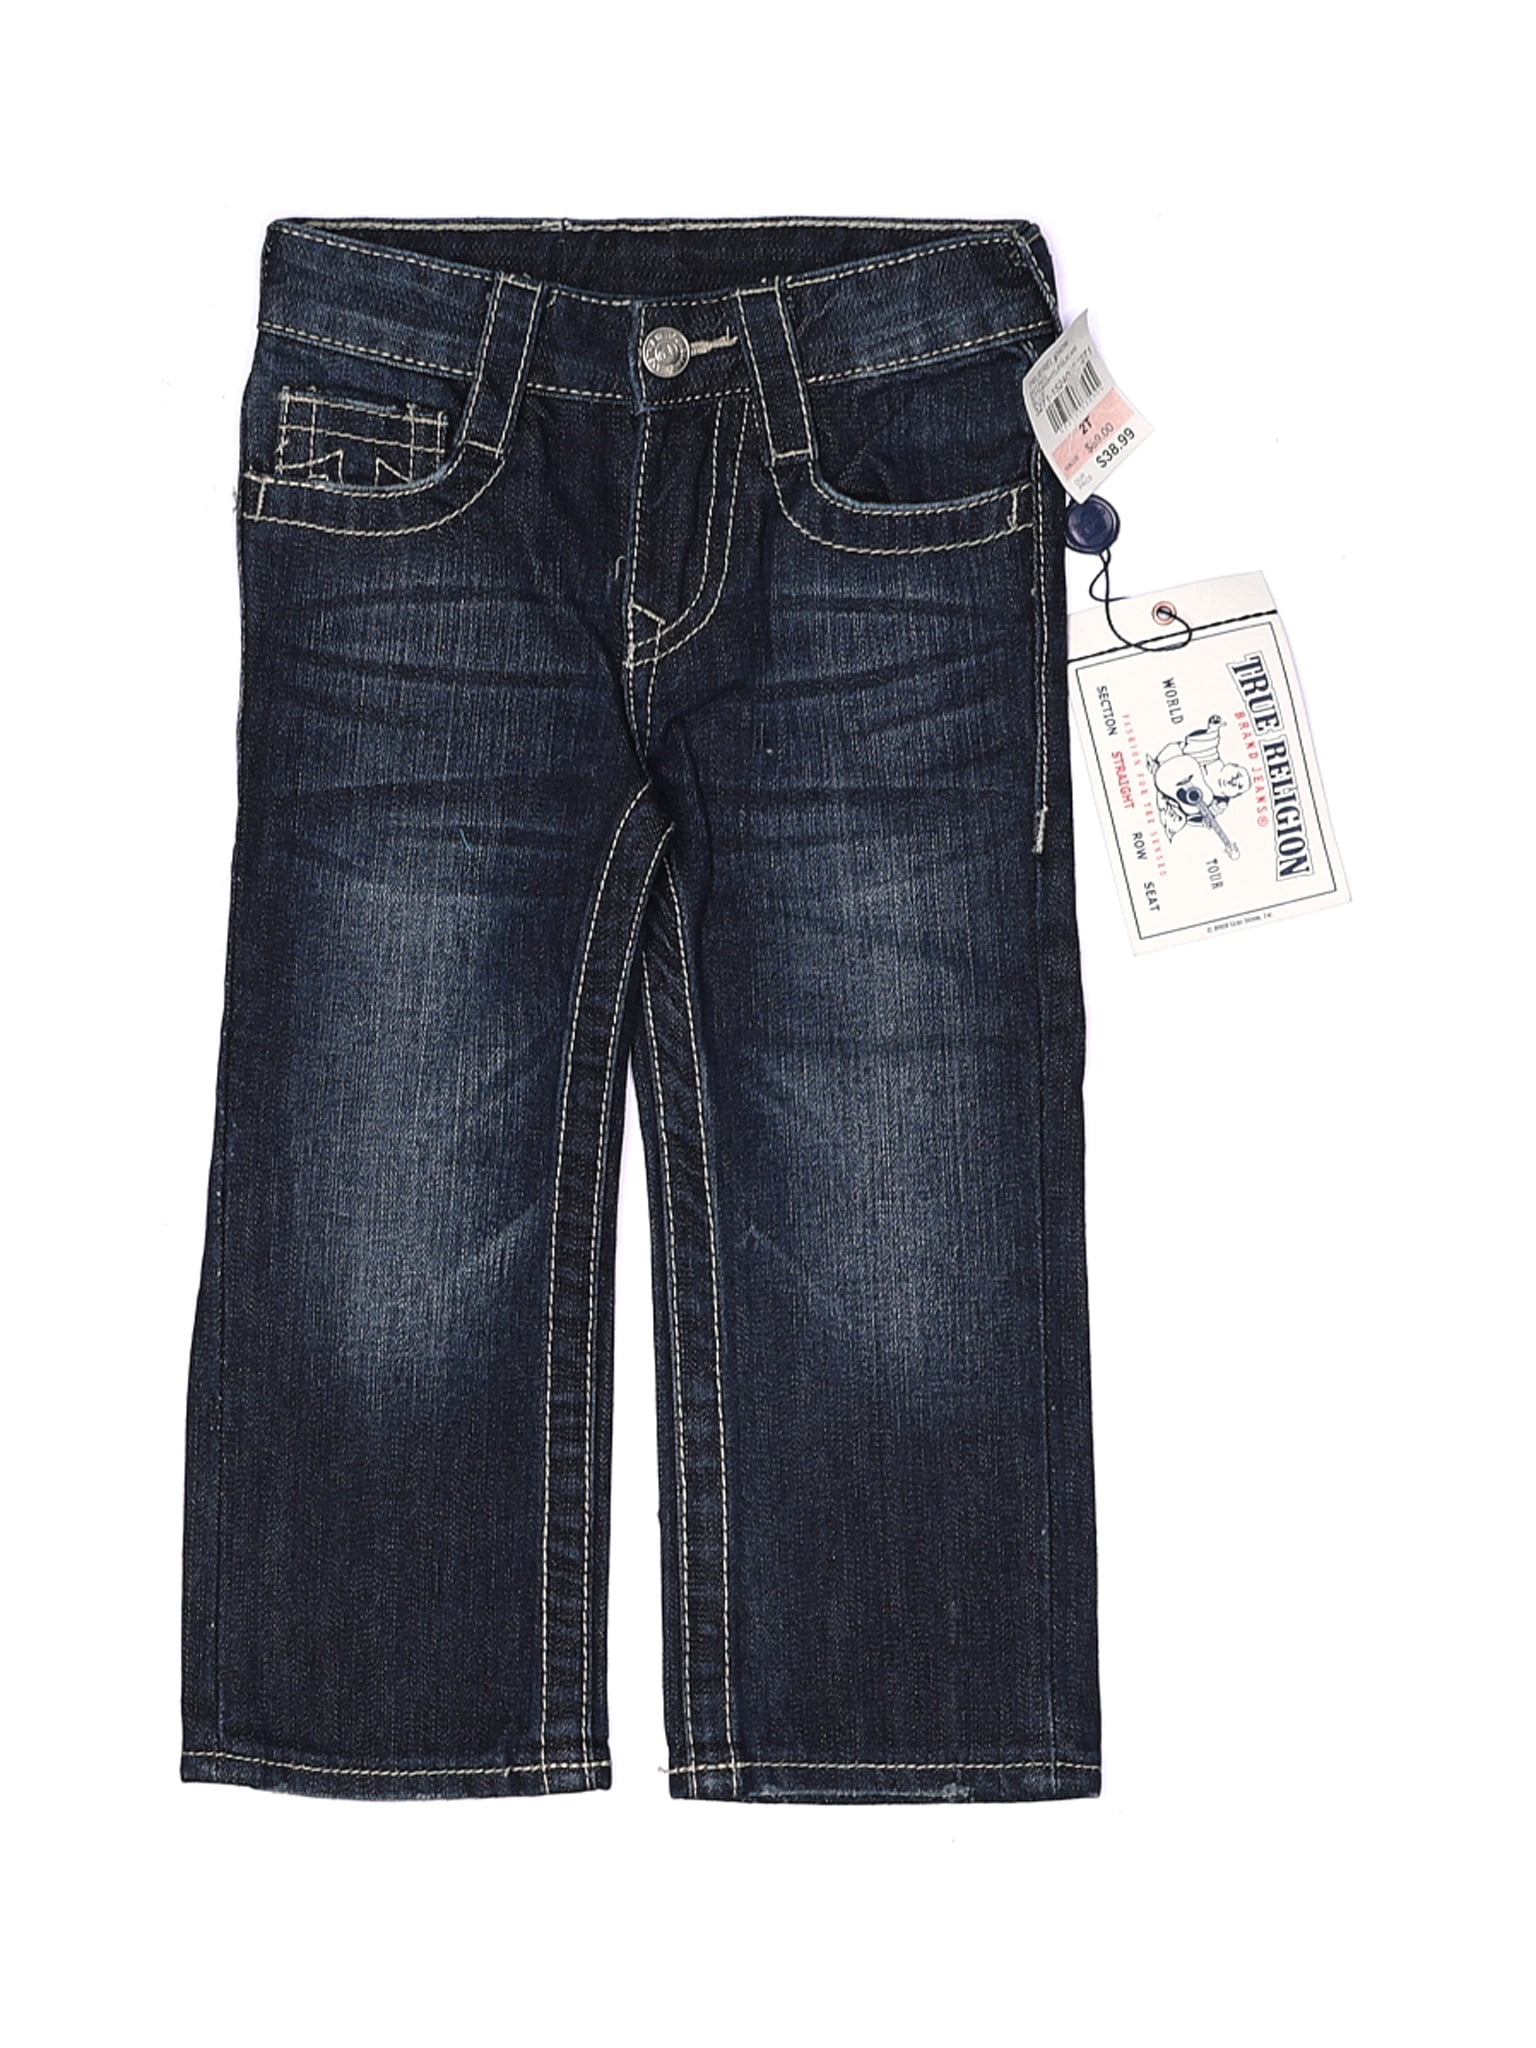 Pre-Owned True Religion Girl's Size 2T 